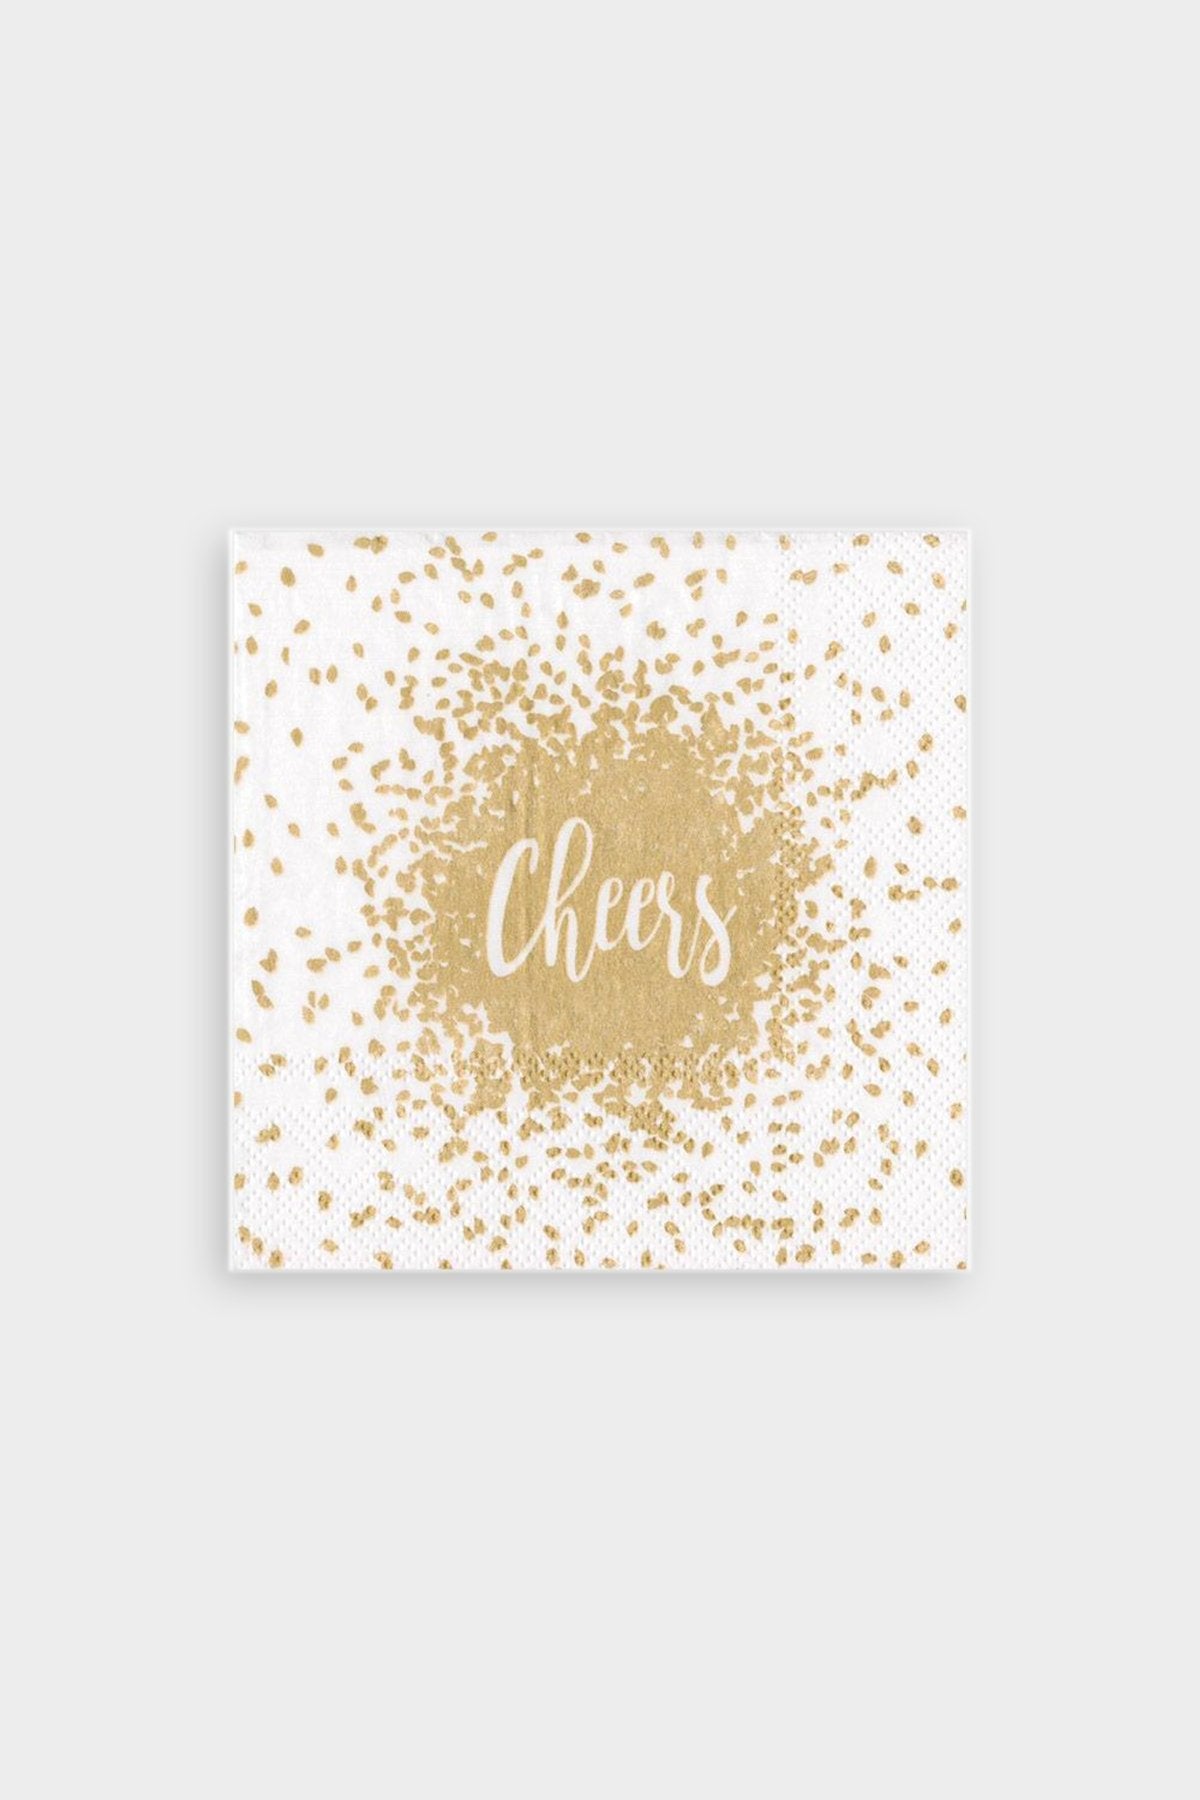 Cheers Paper Cocktail Napkins in Gold - shop-olivia.com